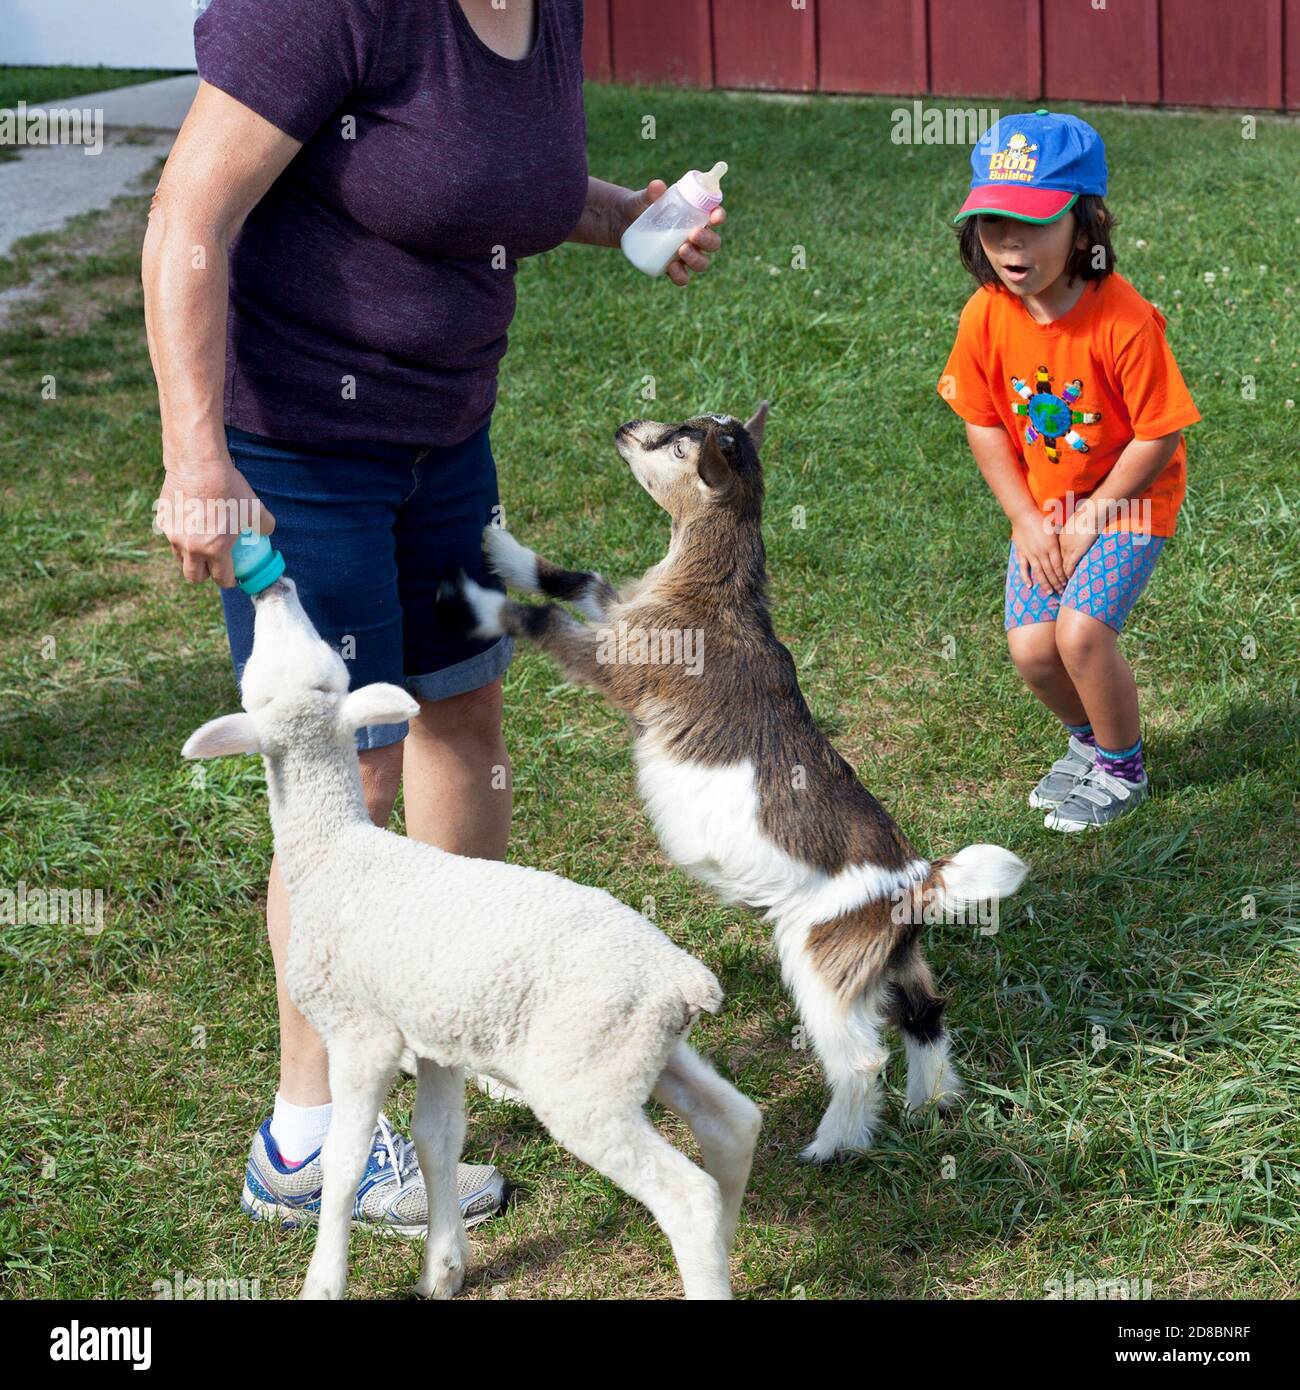 Animals and humans interact at The Farm in Sturgeon Bay, Wisconsin, USA. Stock Photo